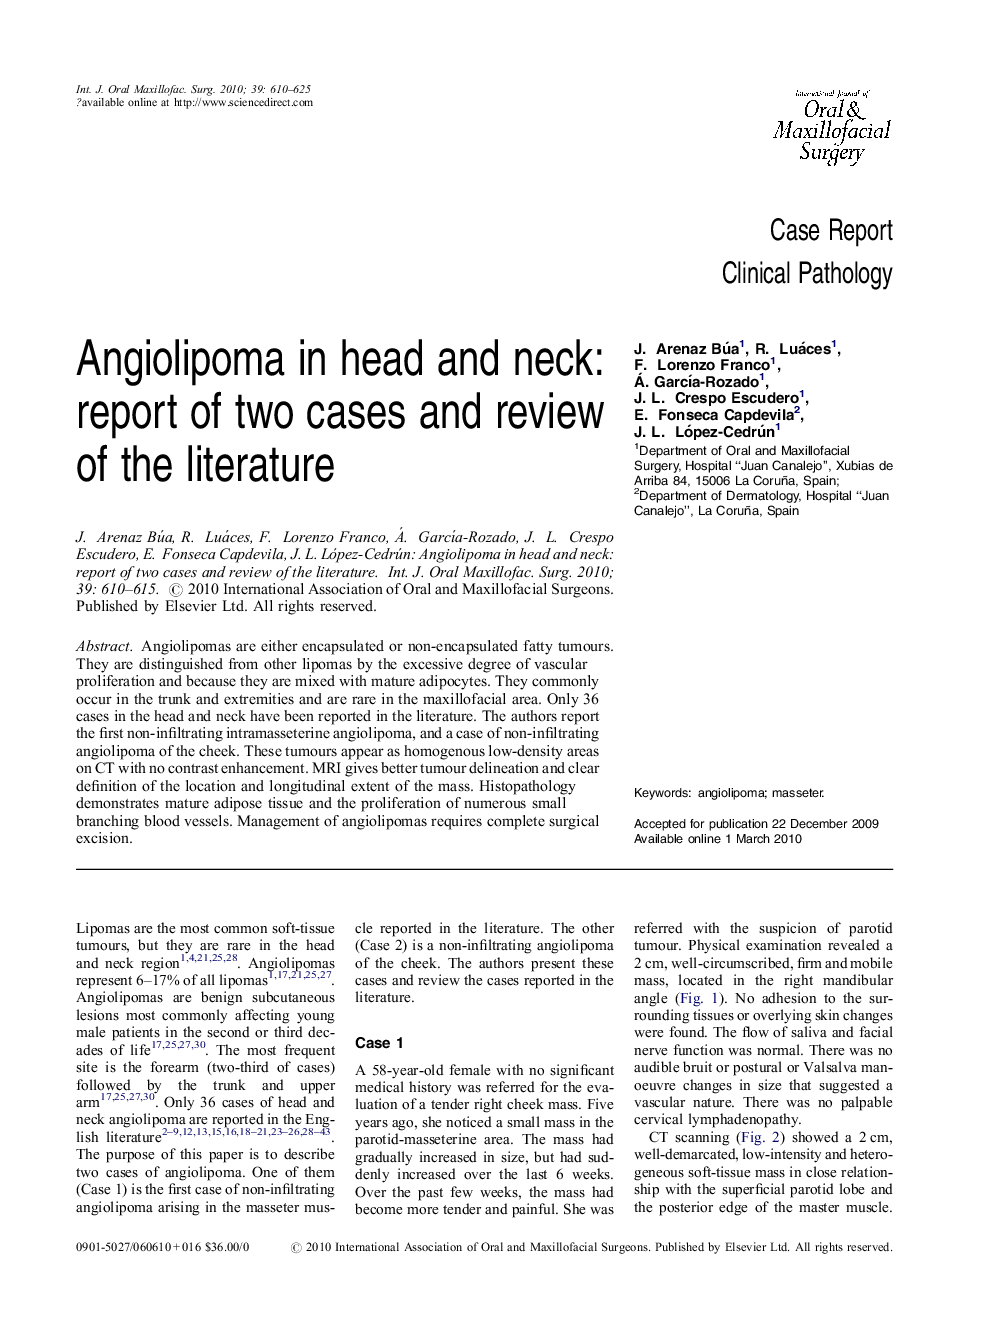 Angiolipoma in head and neck: report of two cases and review of the literature